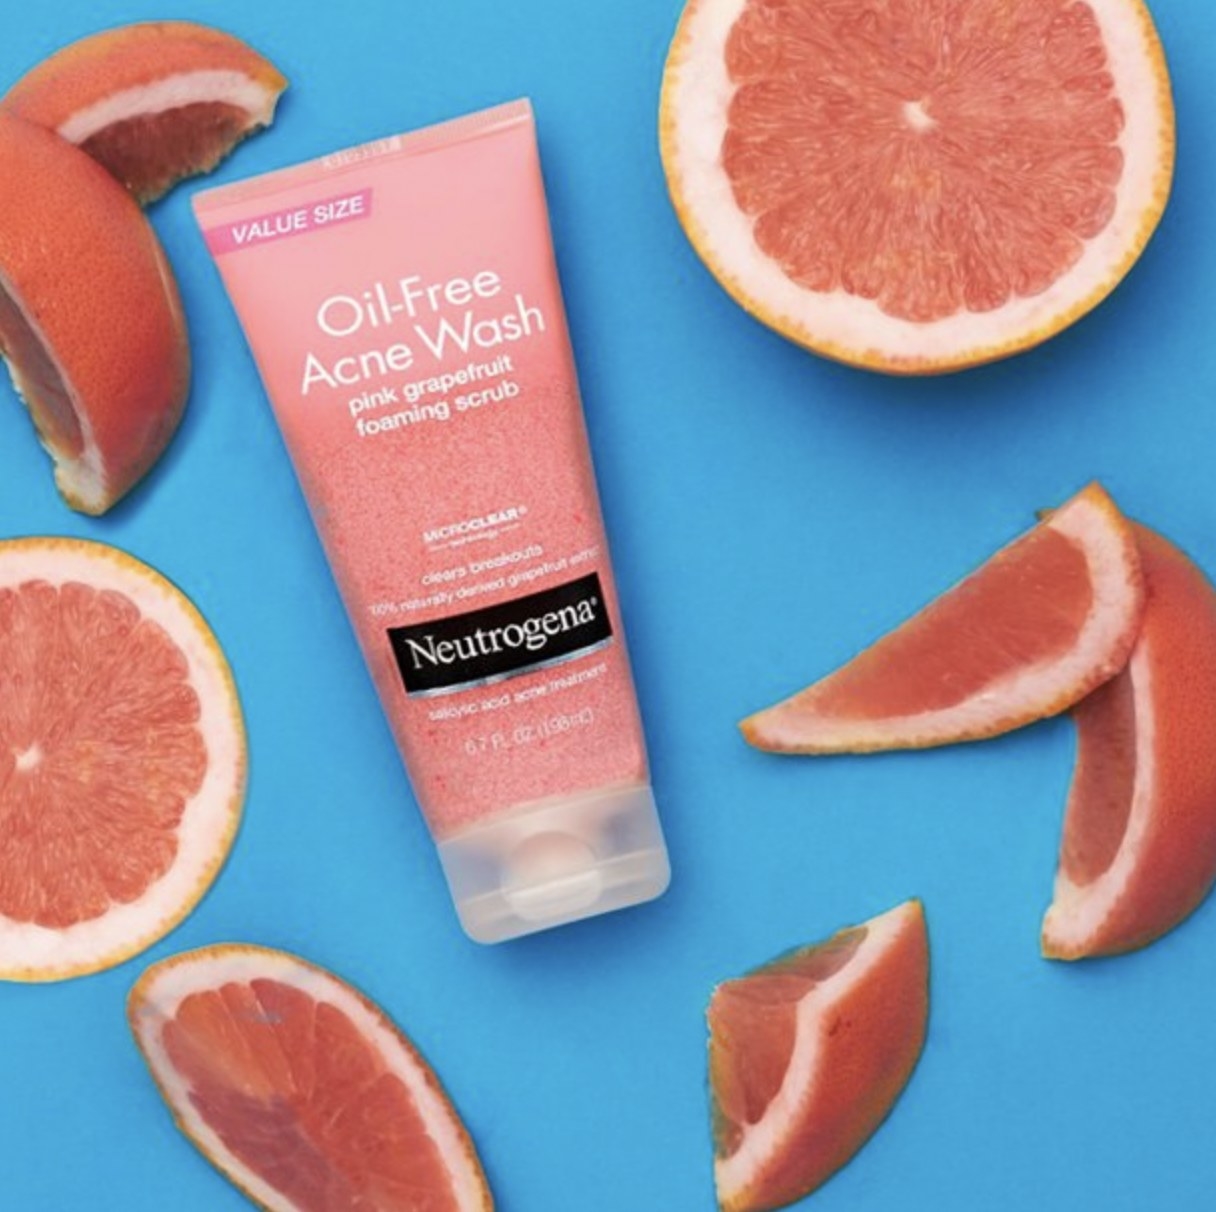 A bottle of face scrub with cut grapefruit